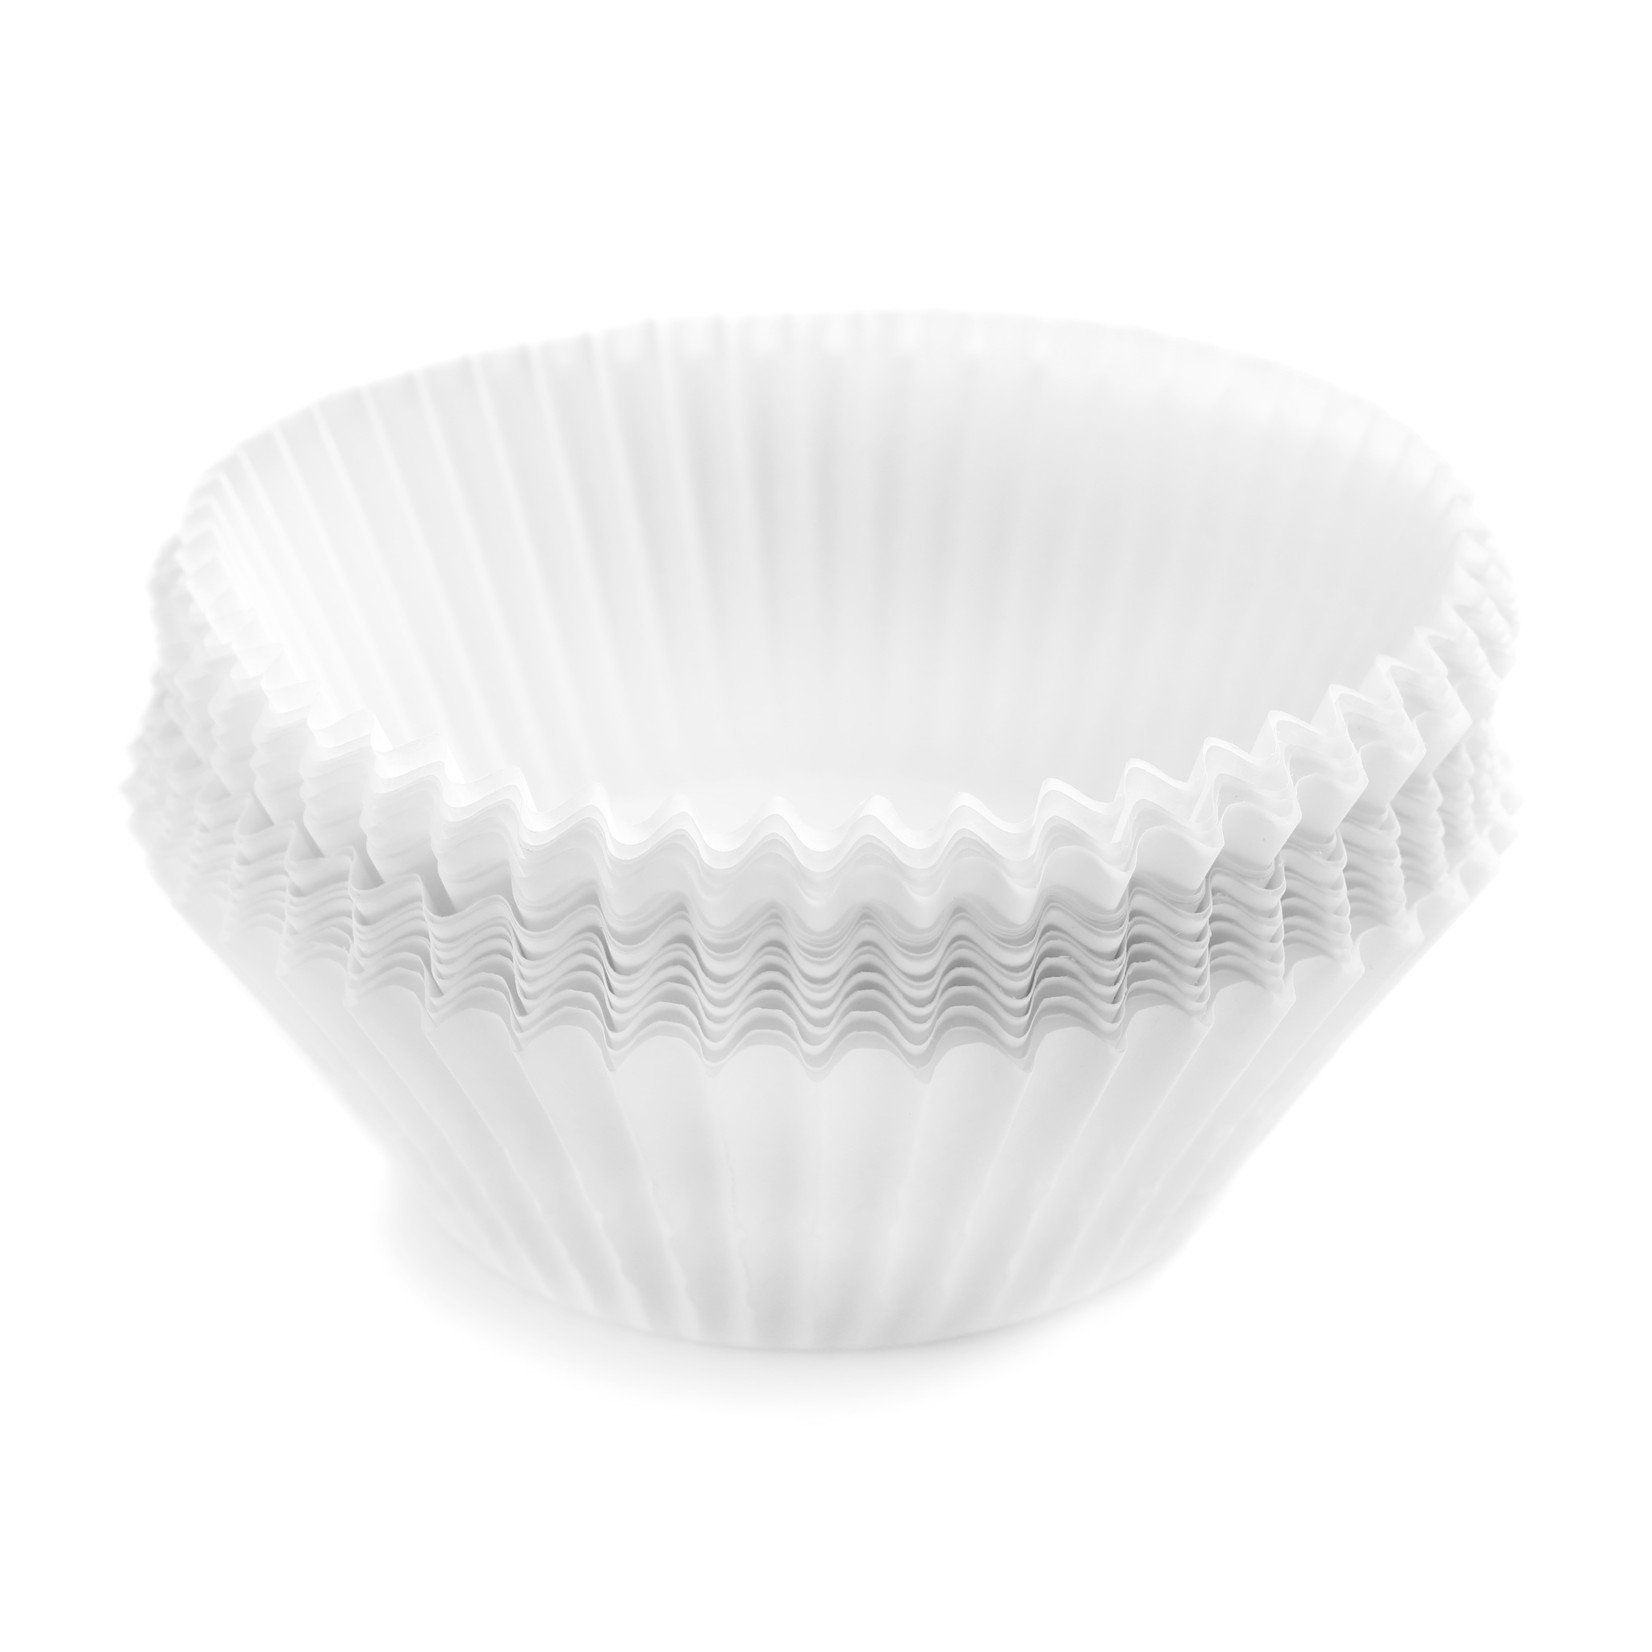 Pastry Depot White Cupcake Liner - 2 x 1.25 (500 ct)